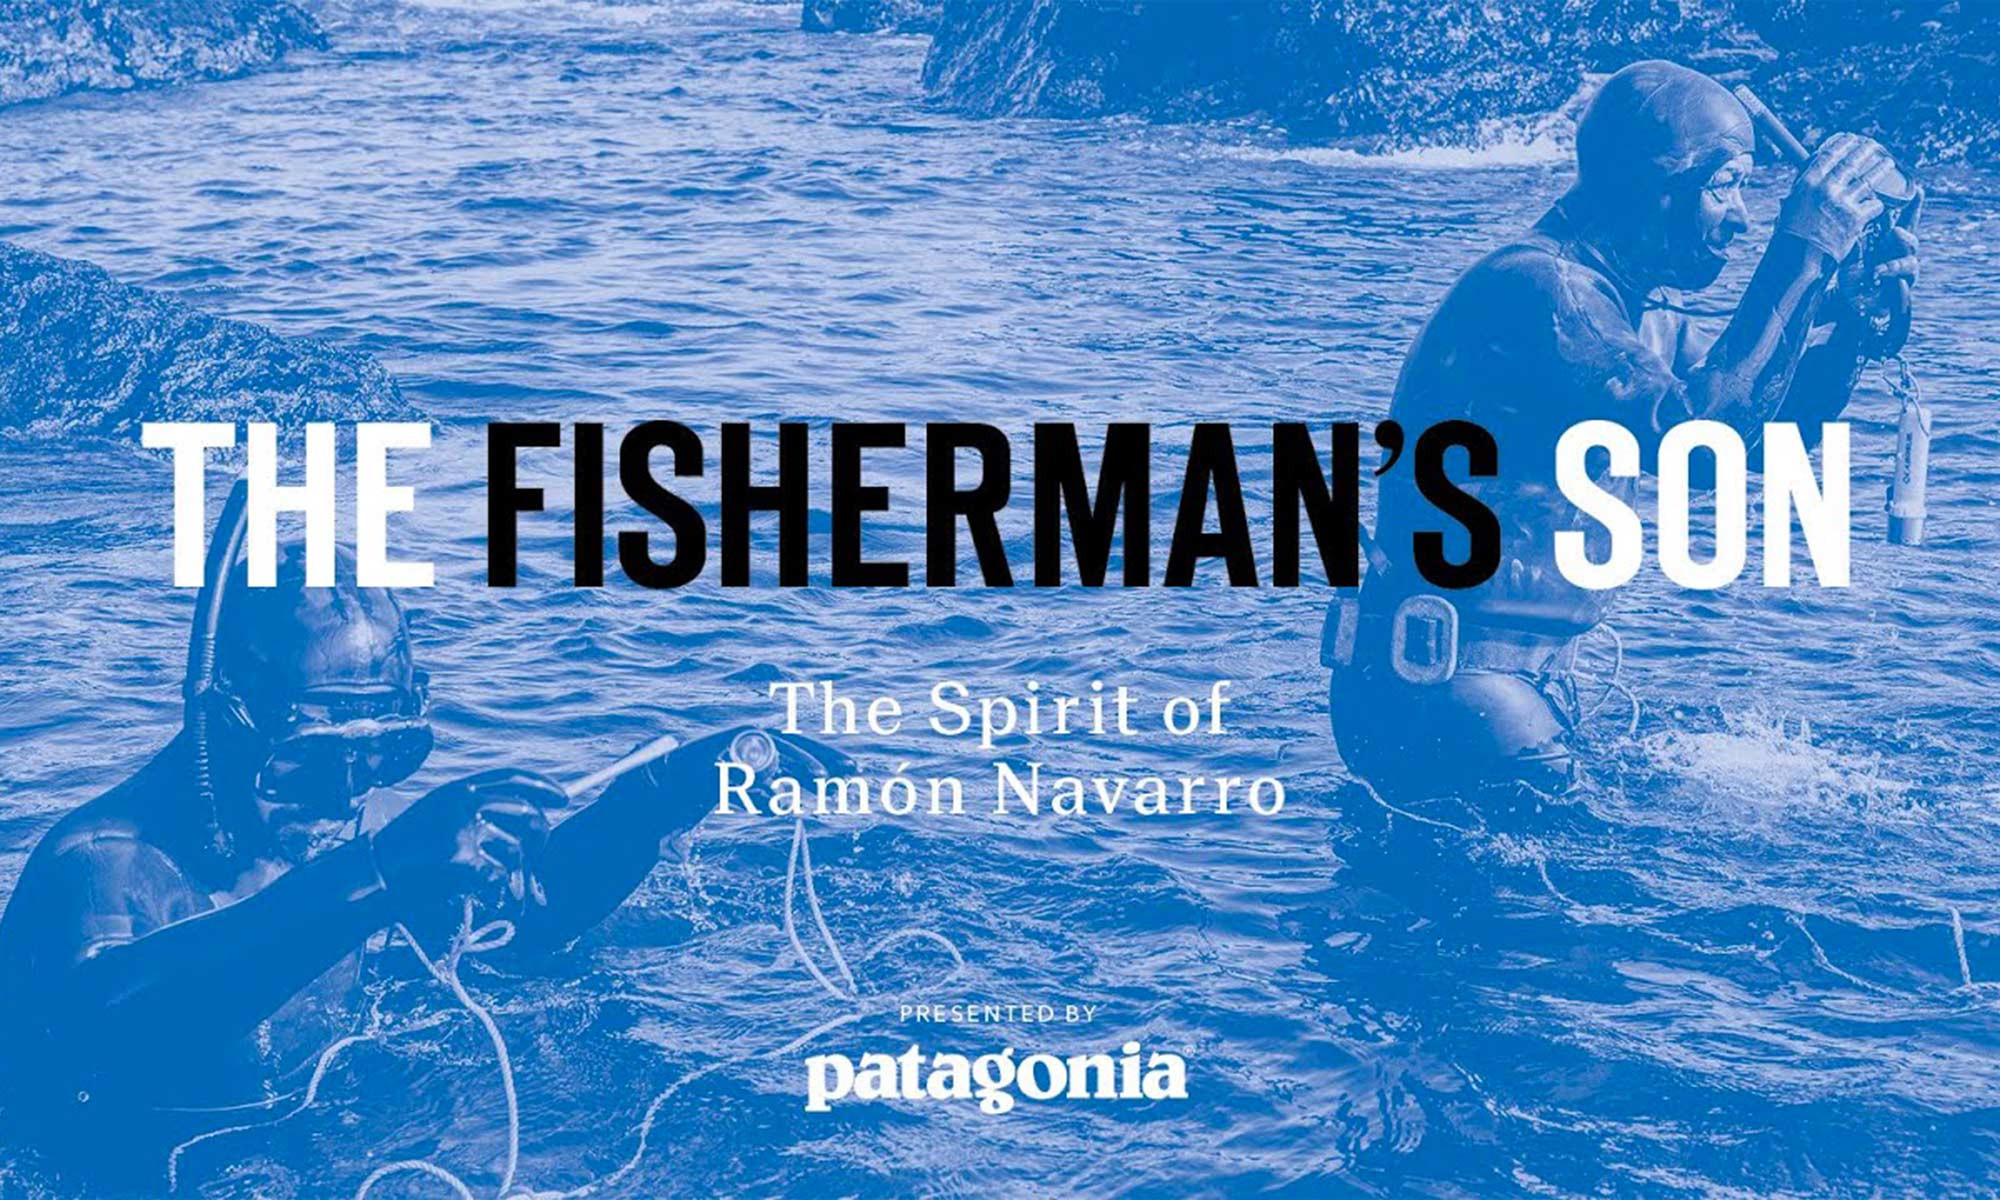 The fisherman's son